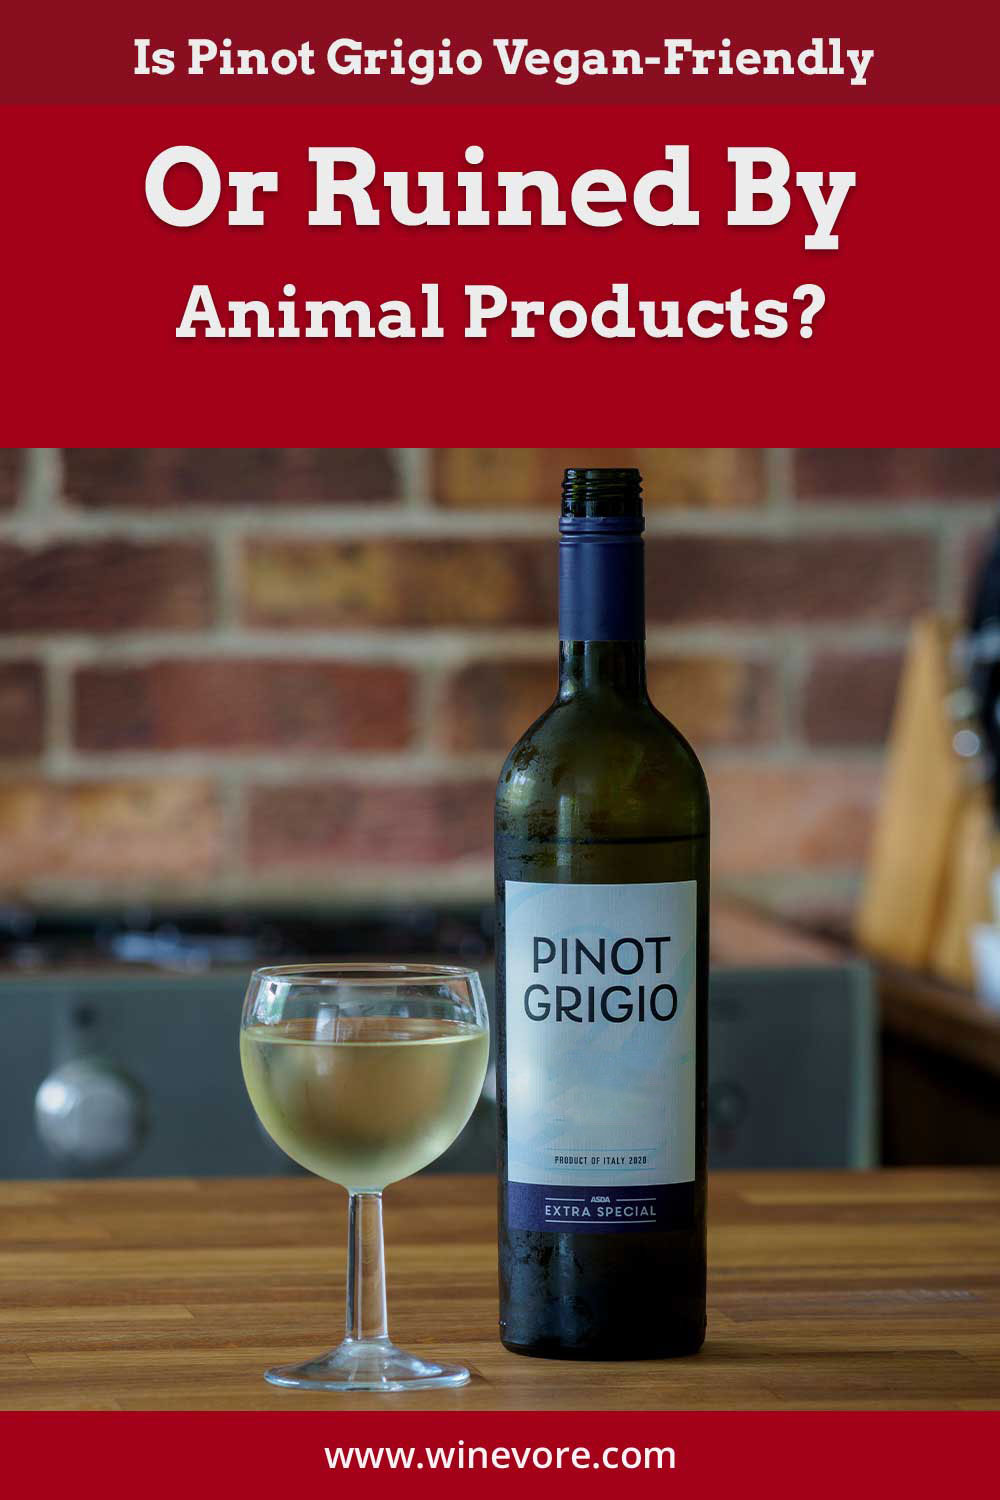 A bottle of Pinot Grigio and a glass - Is it Vegan-Friendly Or Ruined By Animal Products?